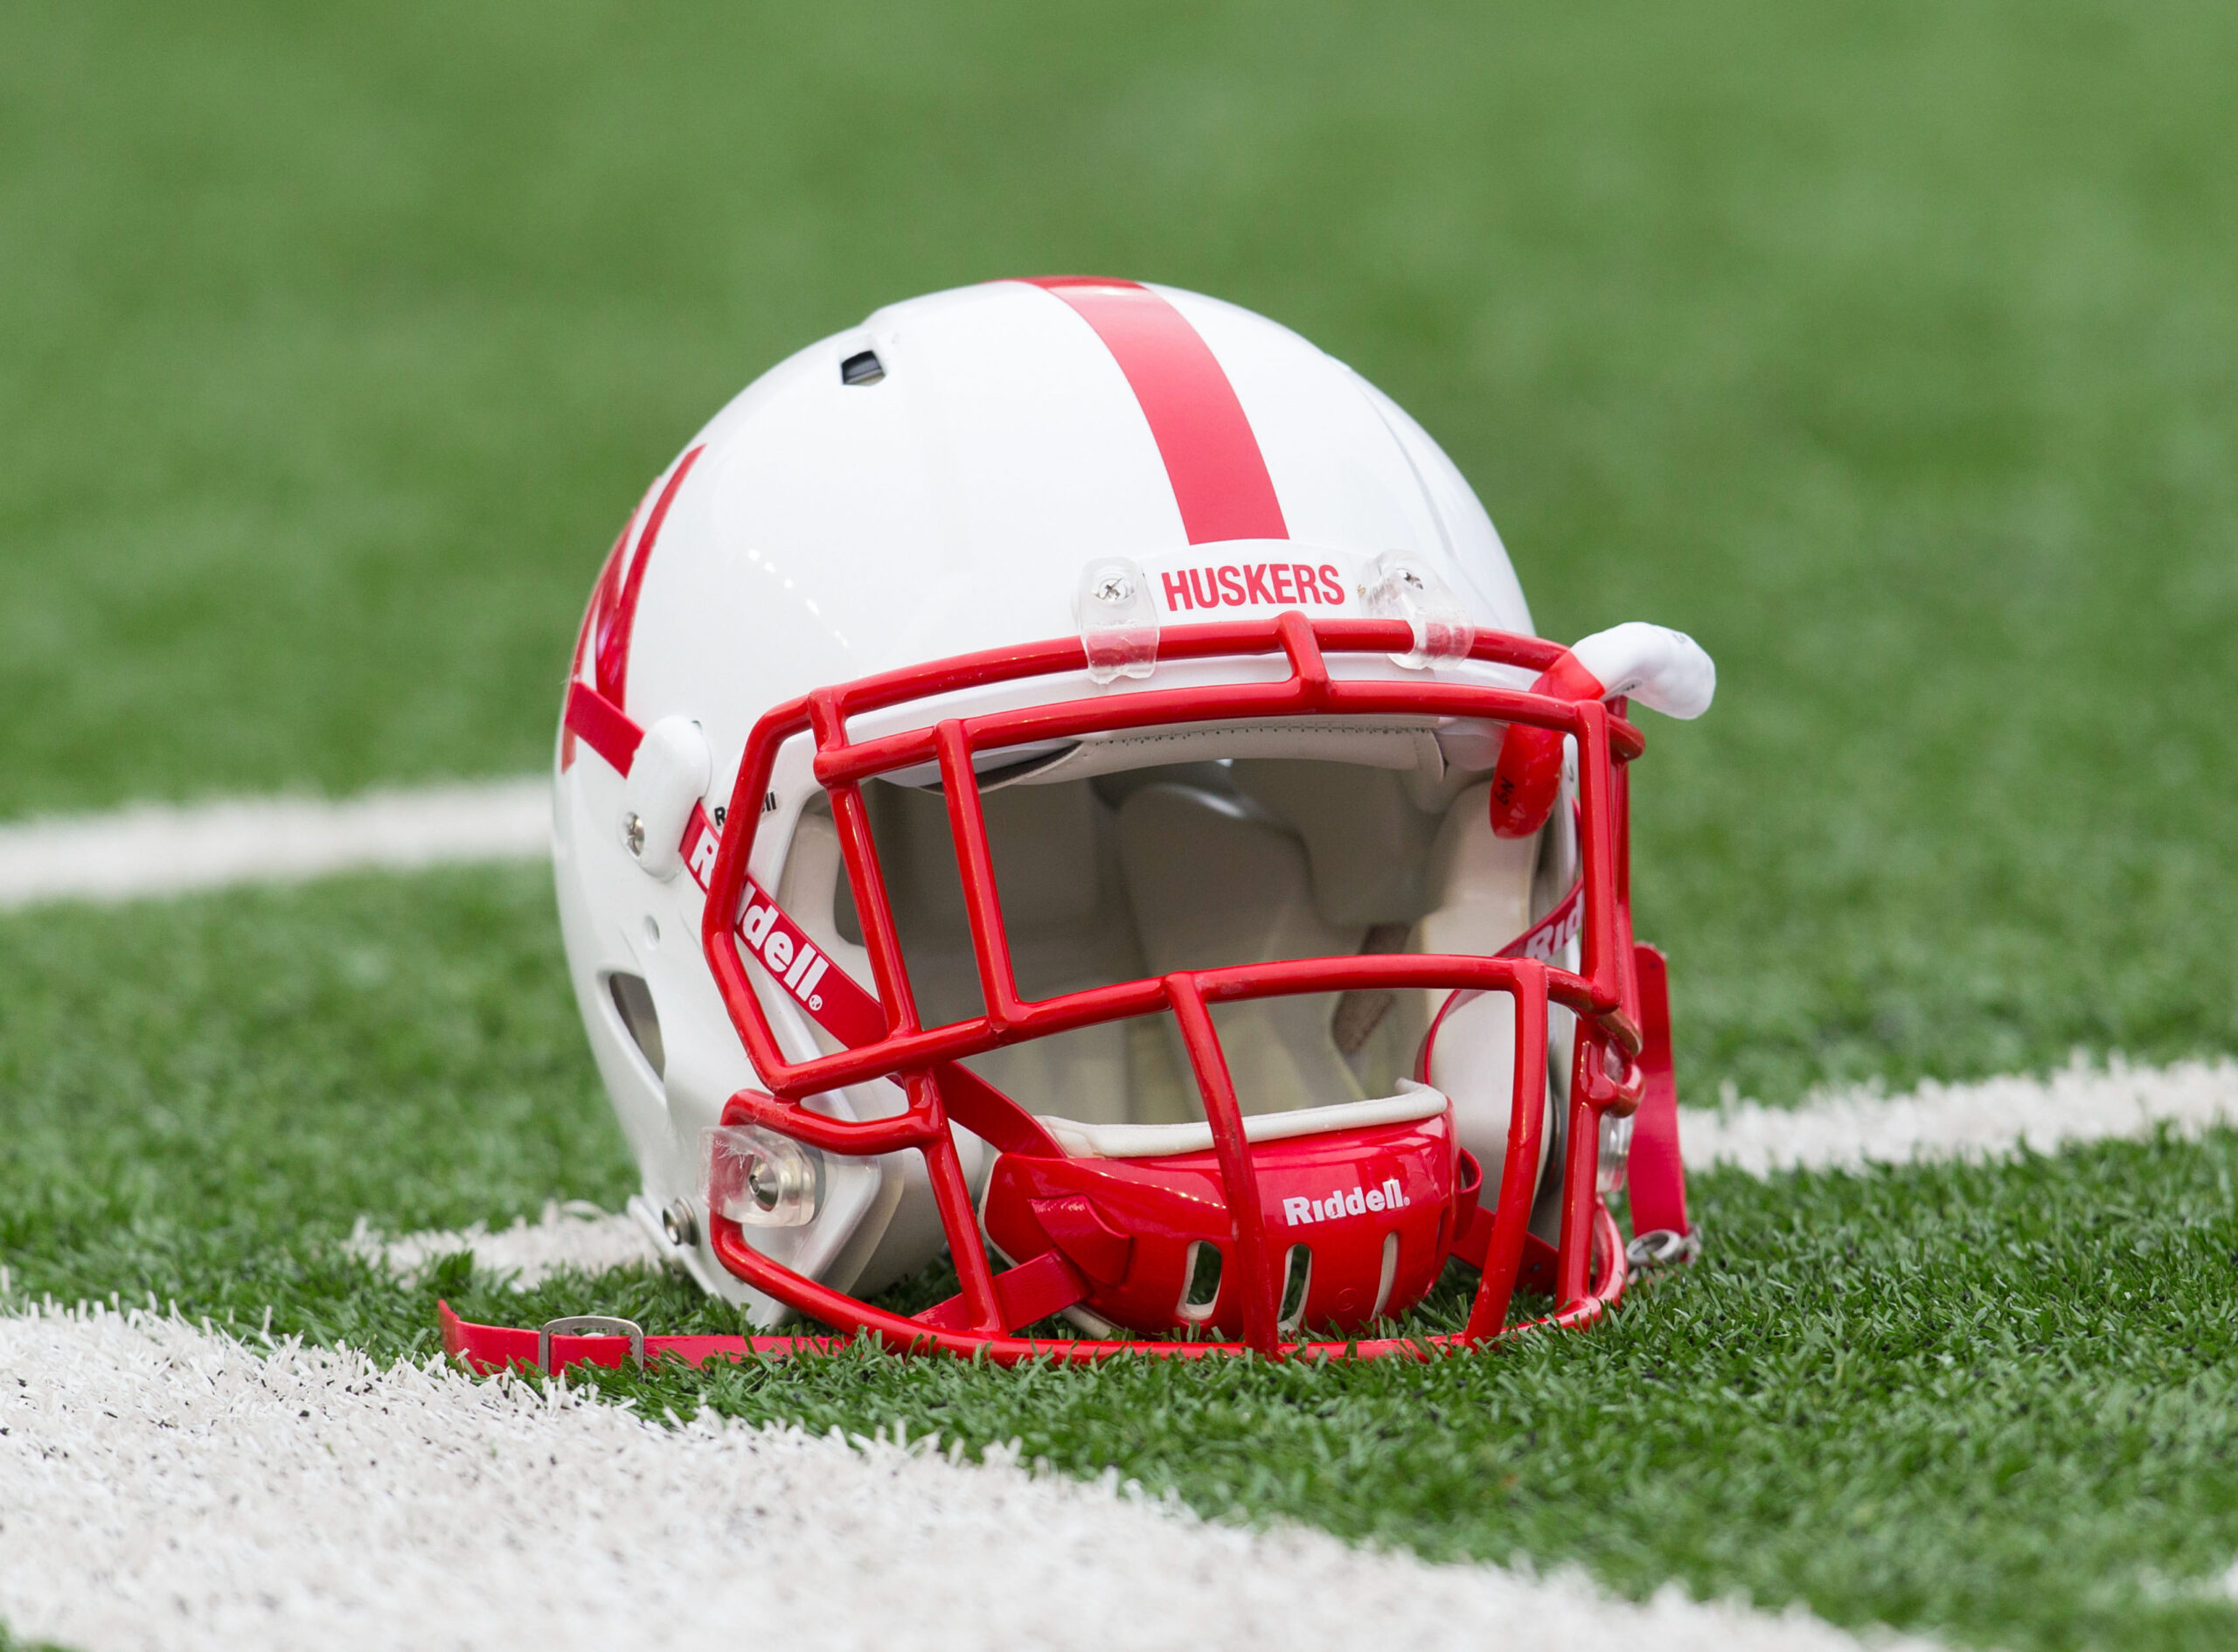 Willis McGahee IV, son of former NFL RB, commits to Nebraska